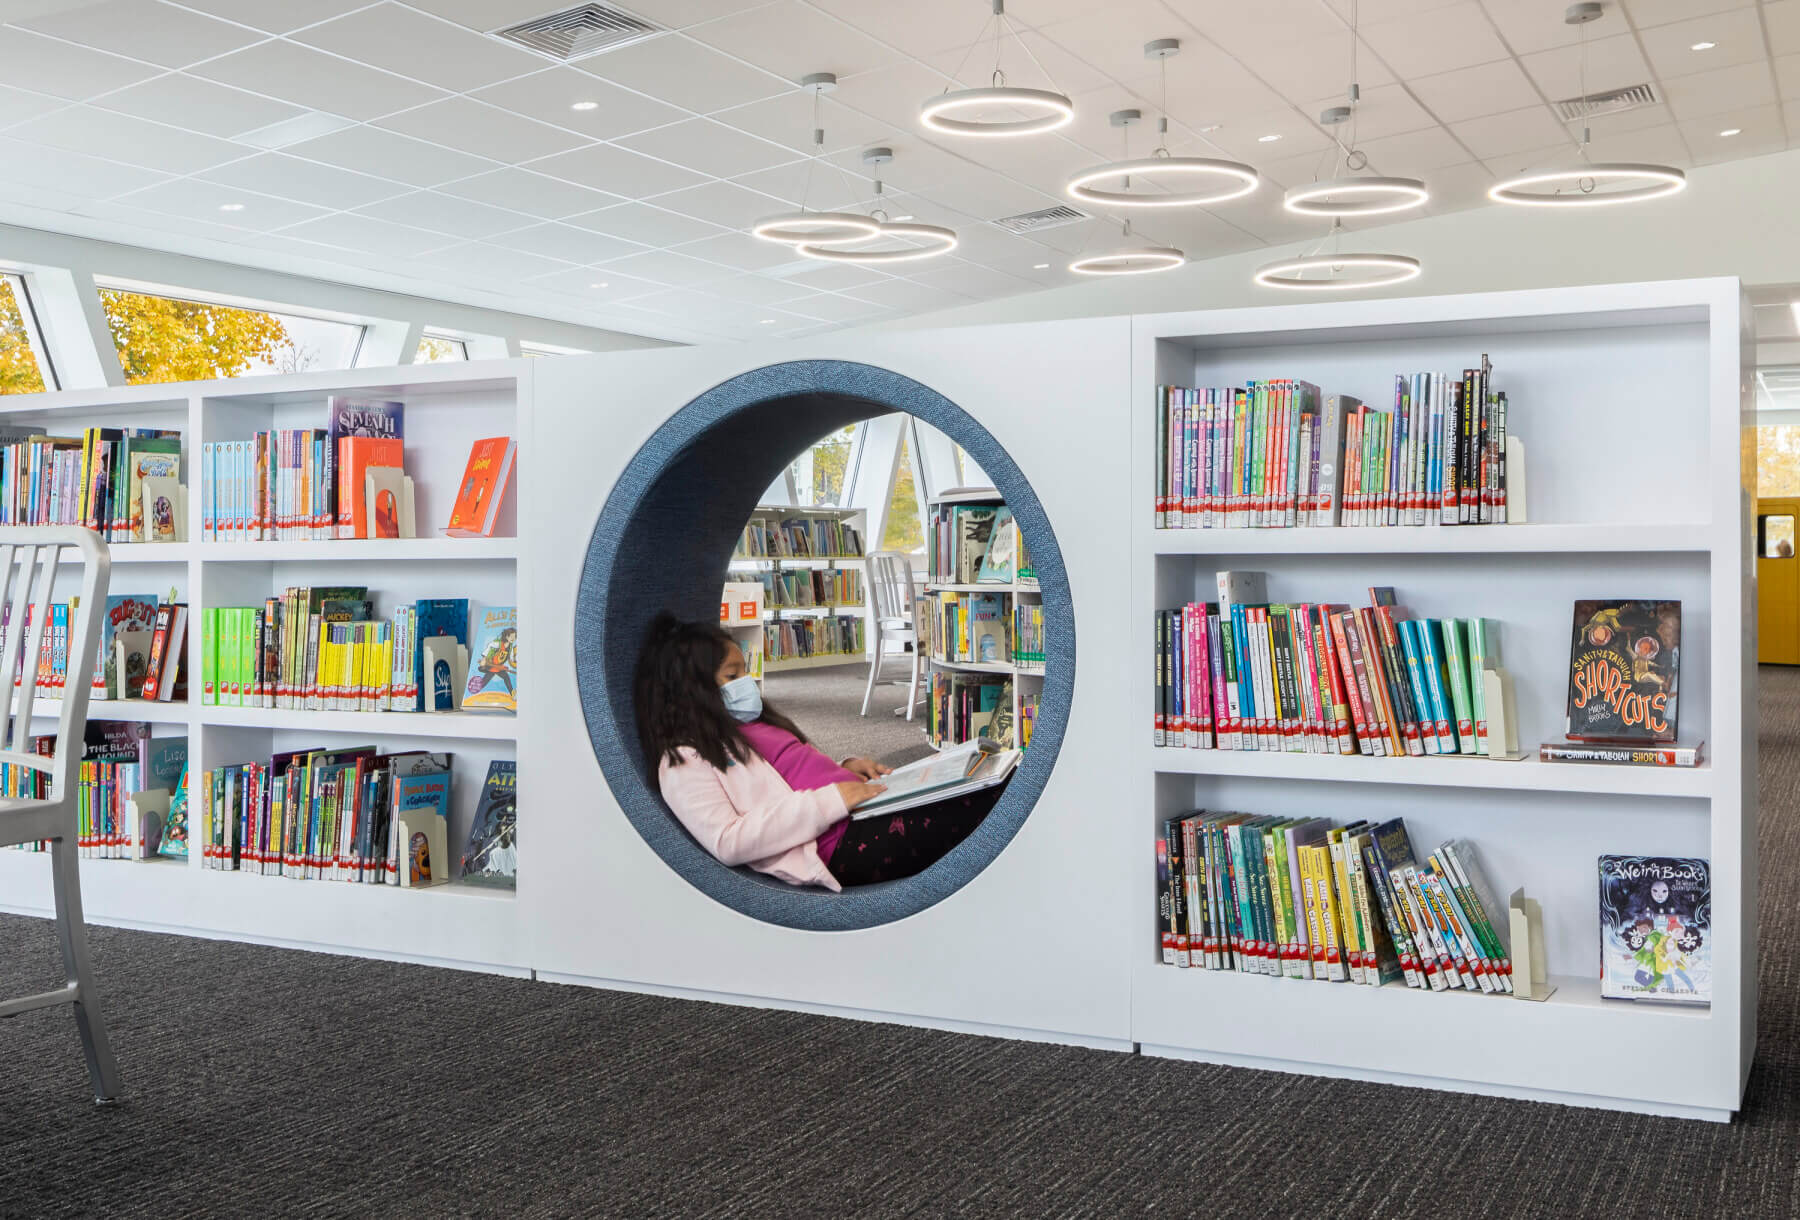 a young girl reads a book while sitting inside a circular nook built within the bookshelves